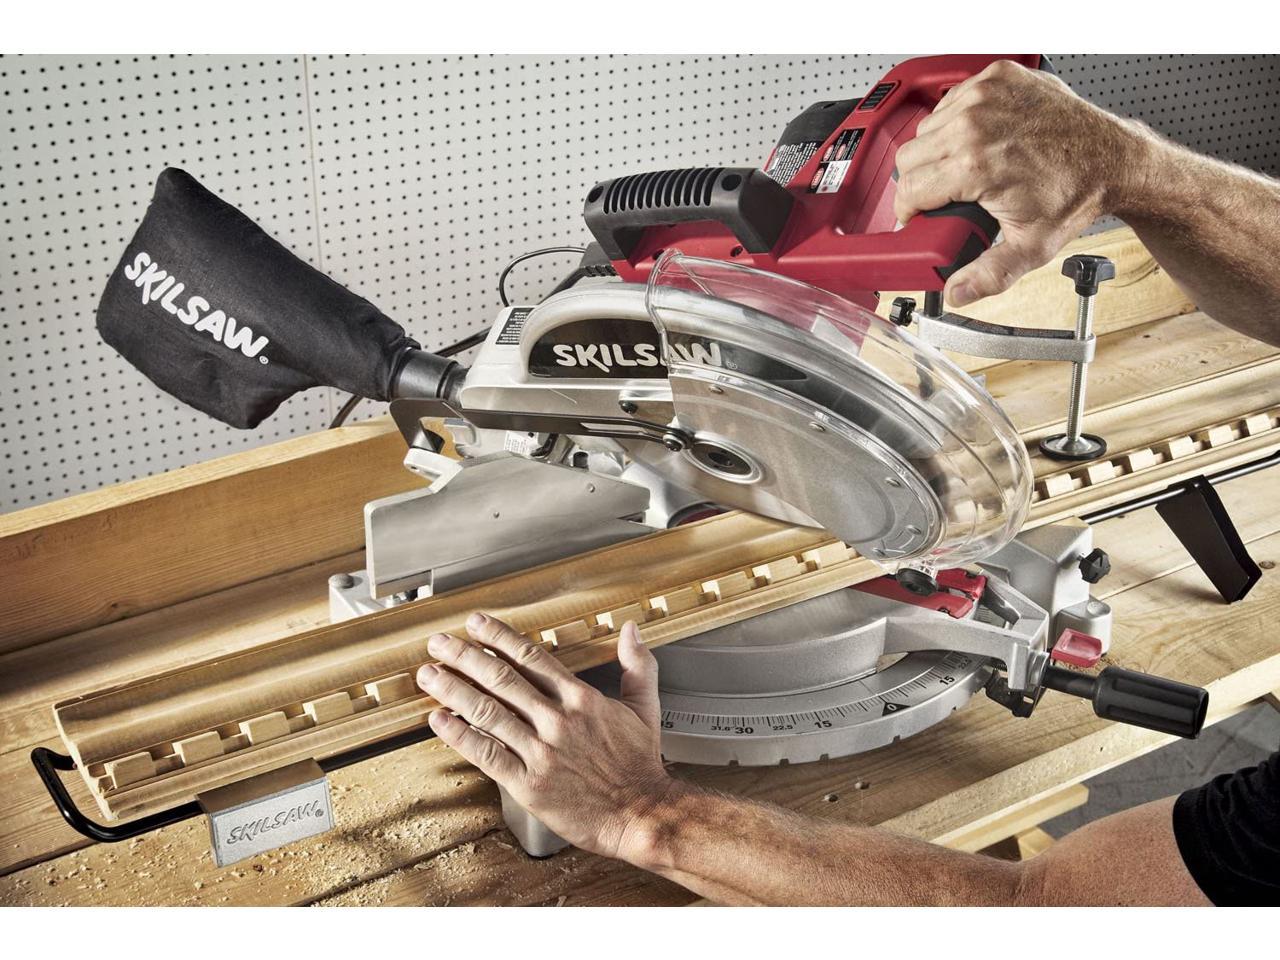 SKIL 3821-01 120 V, 12" dia. Compound Miter Saw with Laser, 4500 RPM